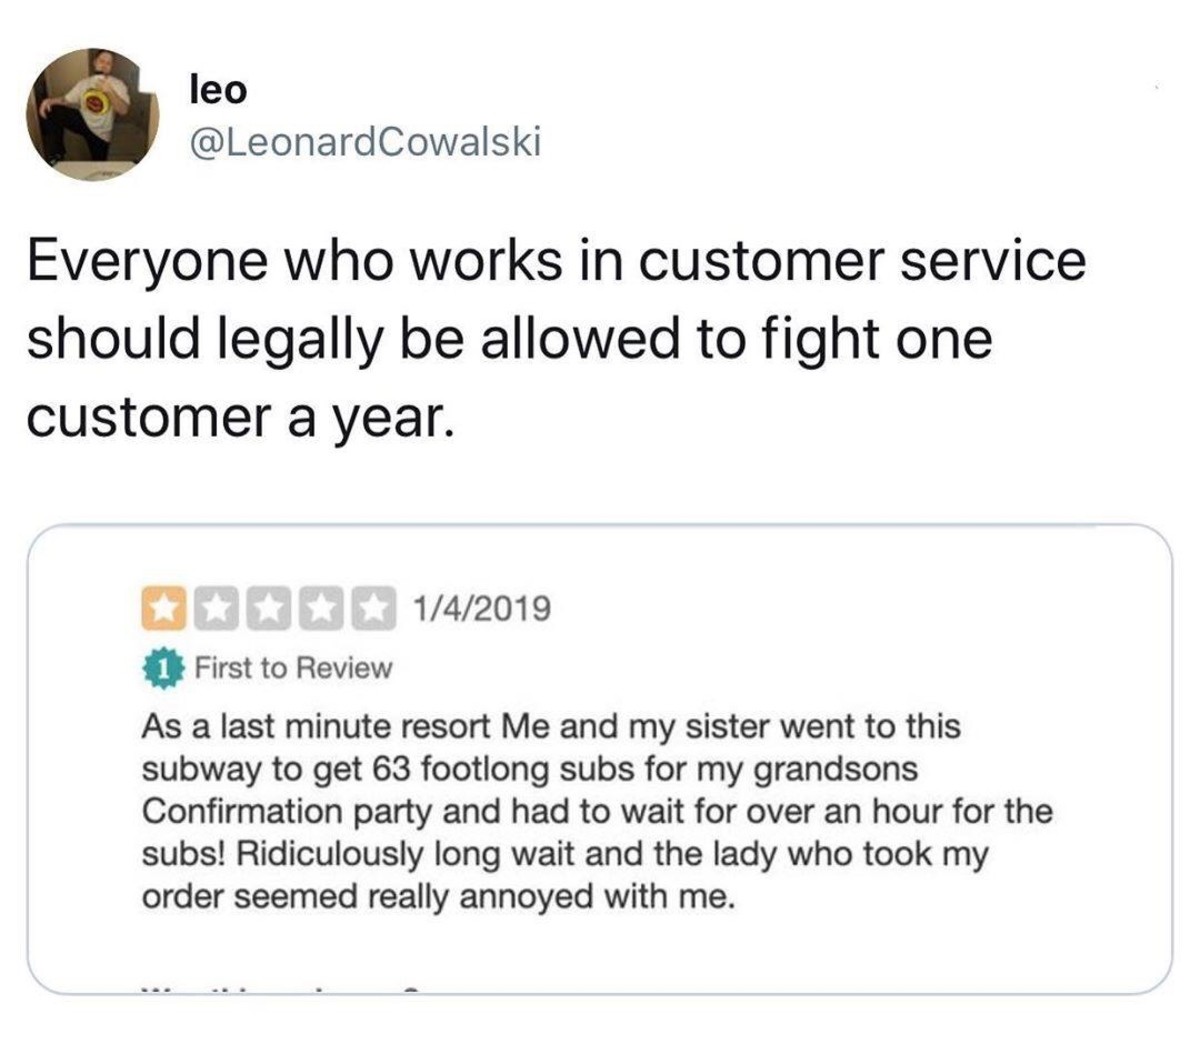 angle - leo Everyone who works in customer service should legally be allowed to fight one customer a year. 142019 1 First to Review As a last minute resort Me and my sister went to this subway to get 63 footlong subs for my grandsons Confirmation party an